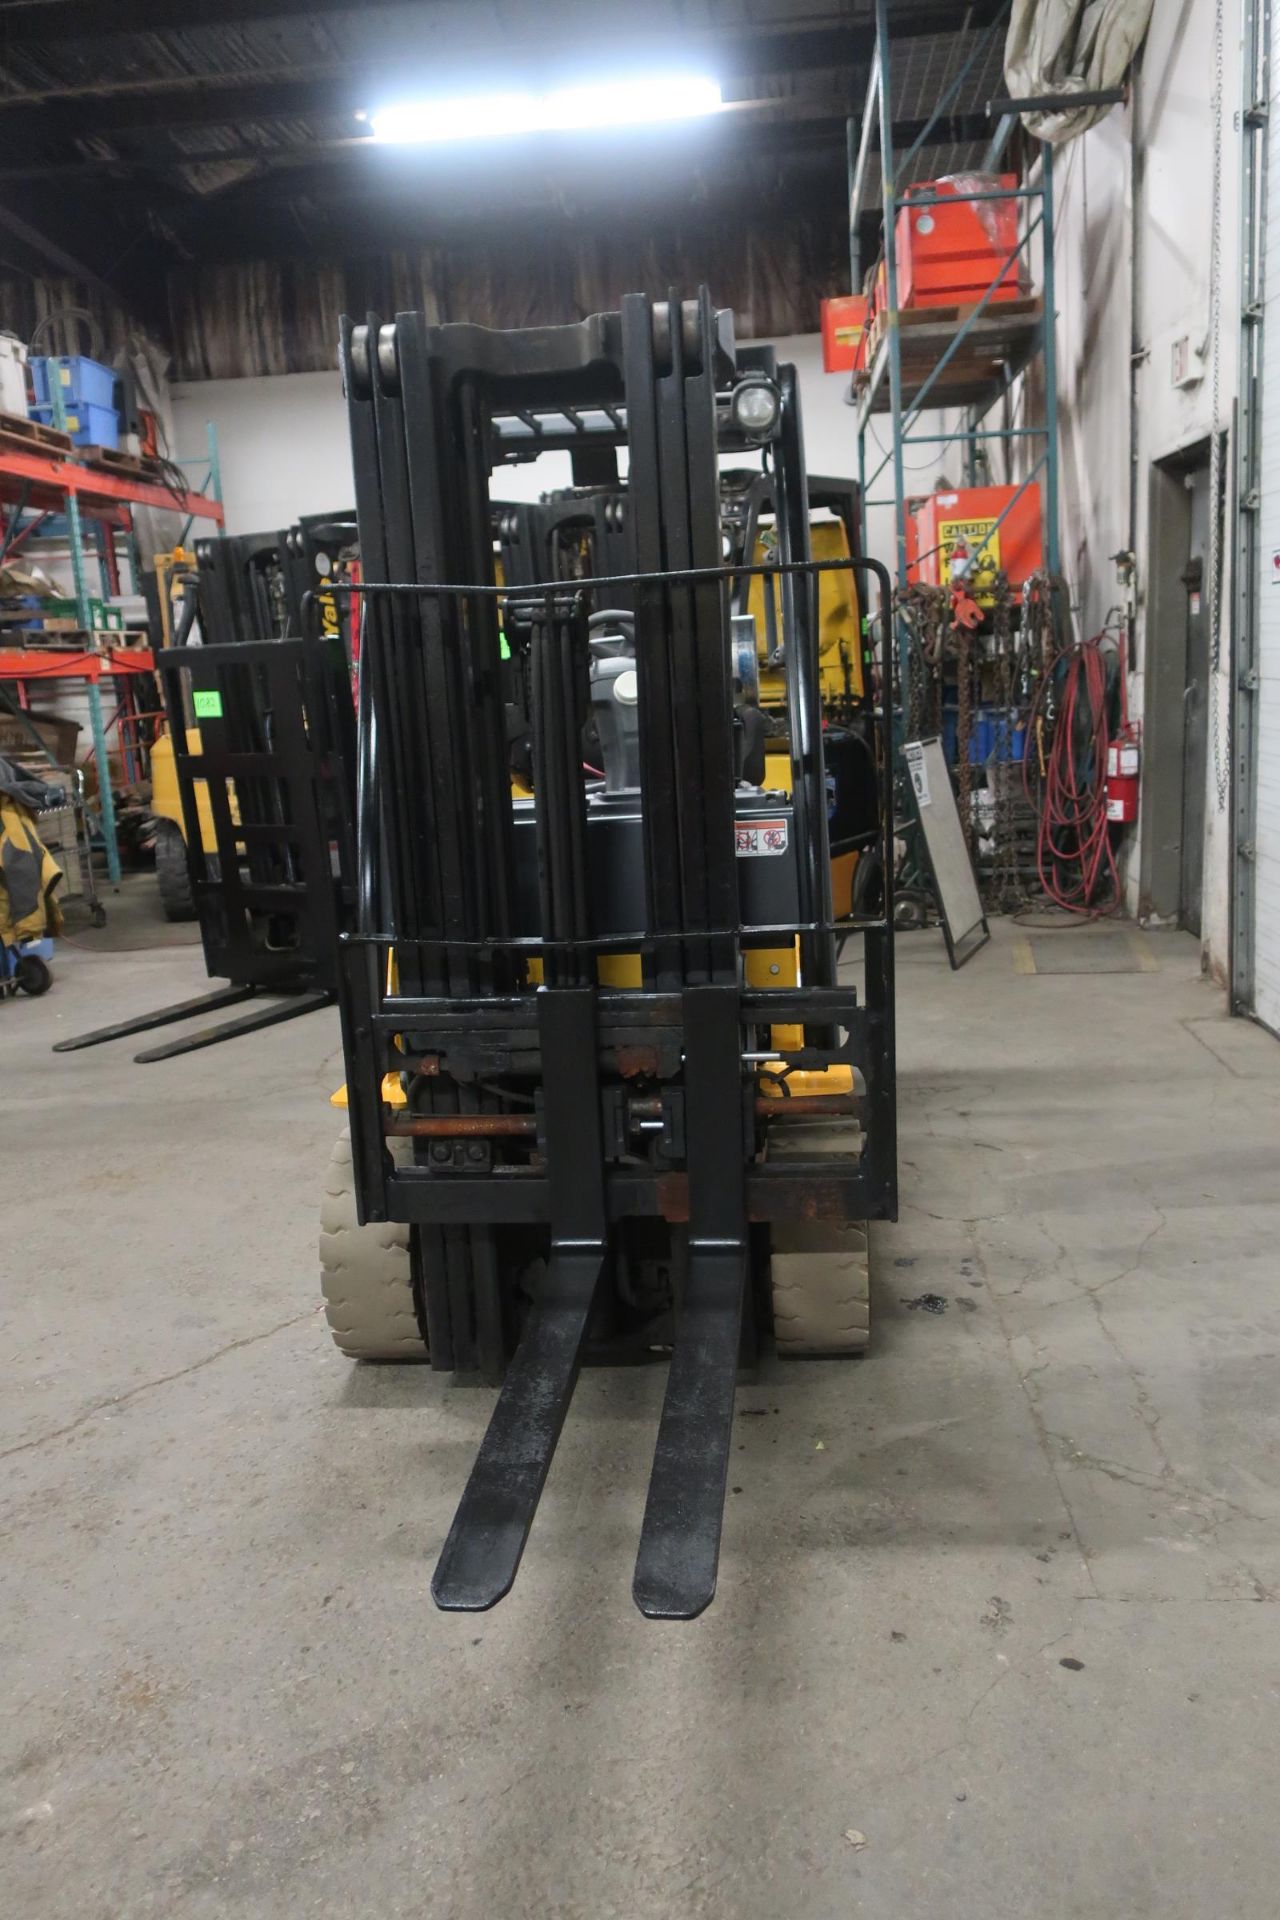 FREE CUSTOMS - 2015 Yale 5500lbs Capacity Forklift LPG (propane) with 3-stage mast with sideshift ( - Image 2 of 2